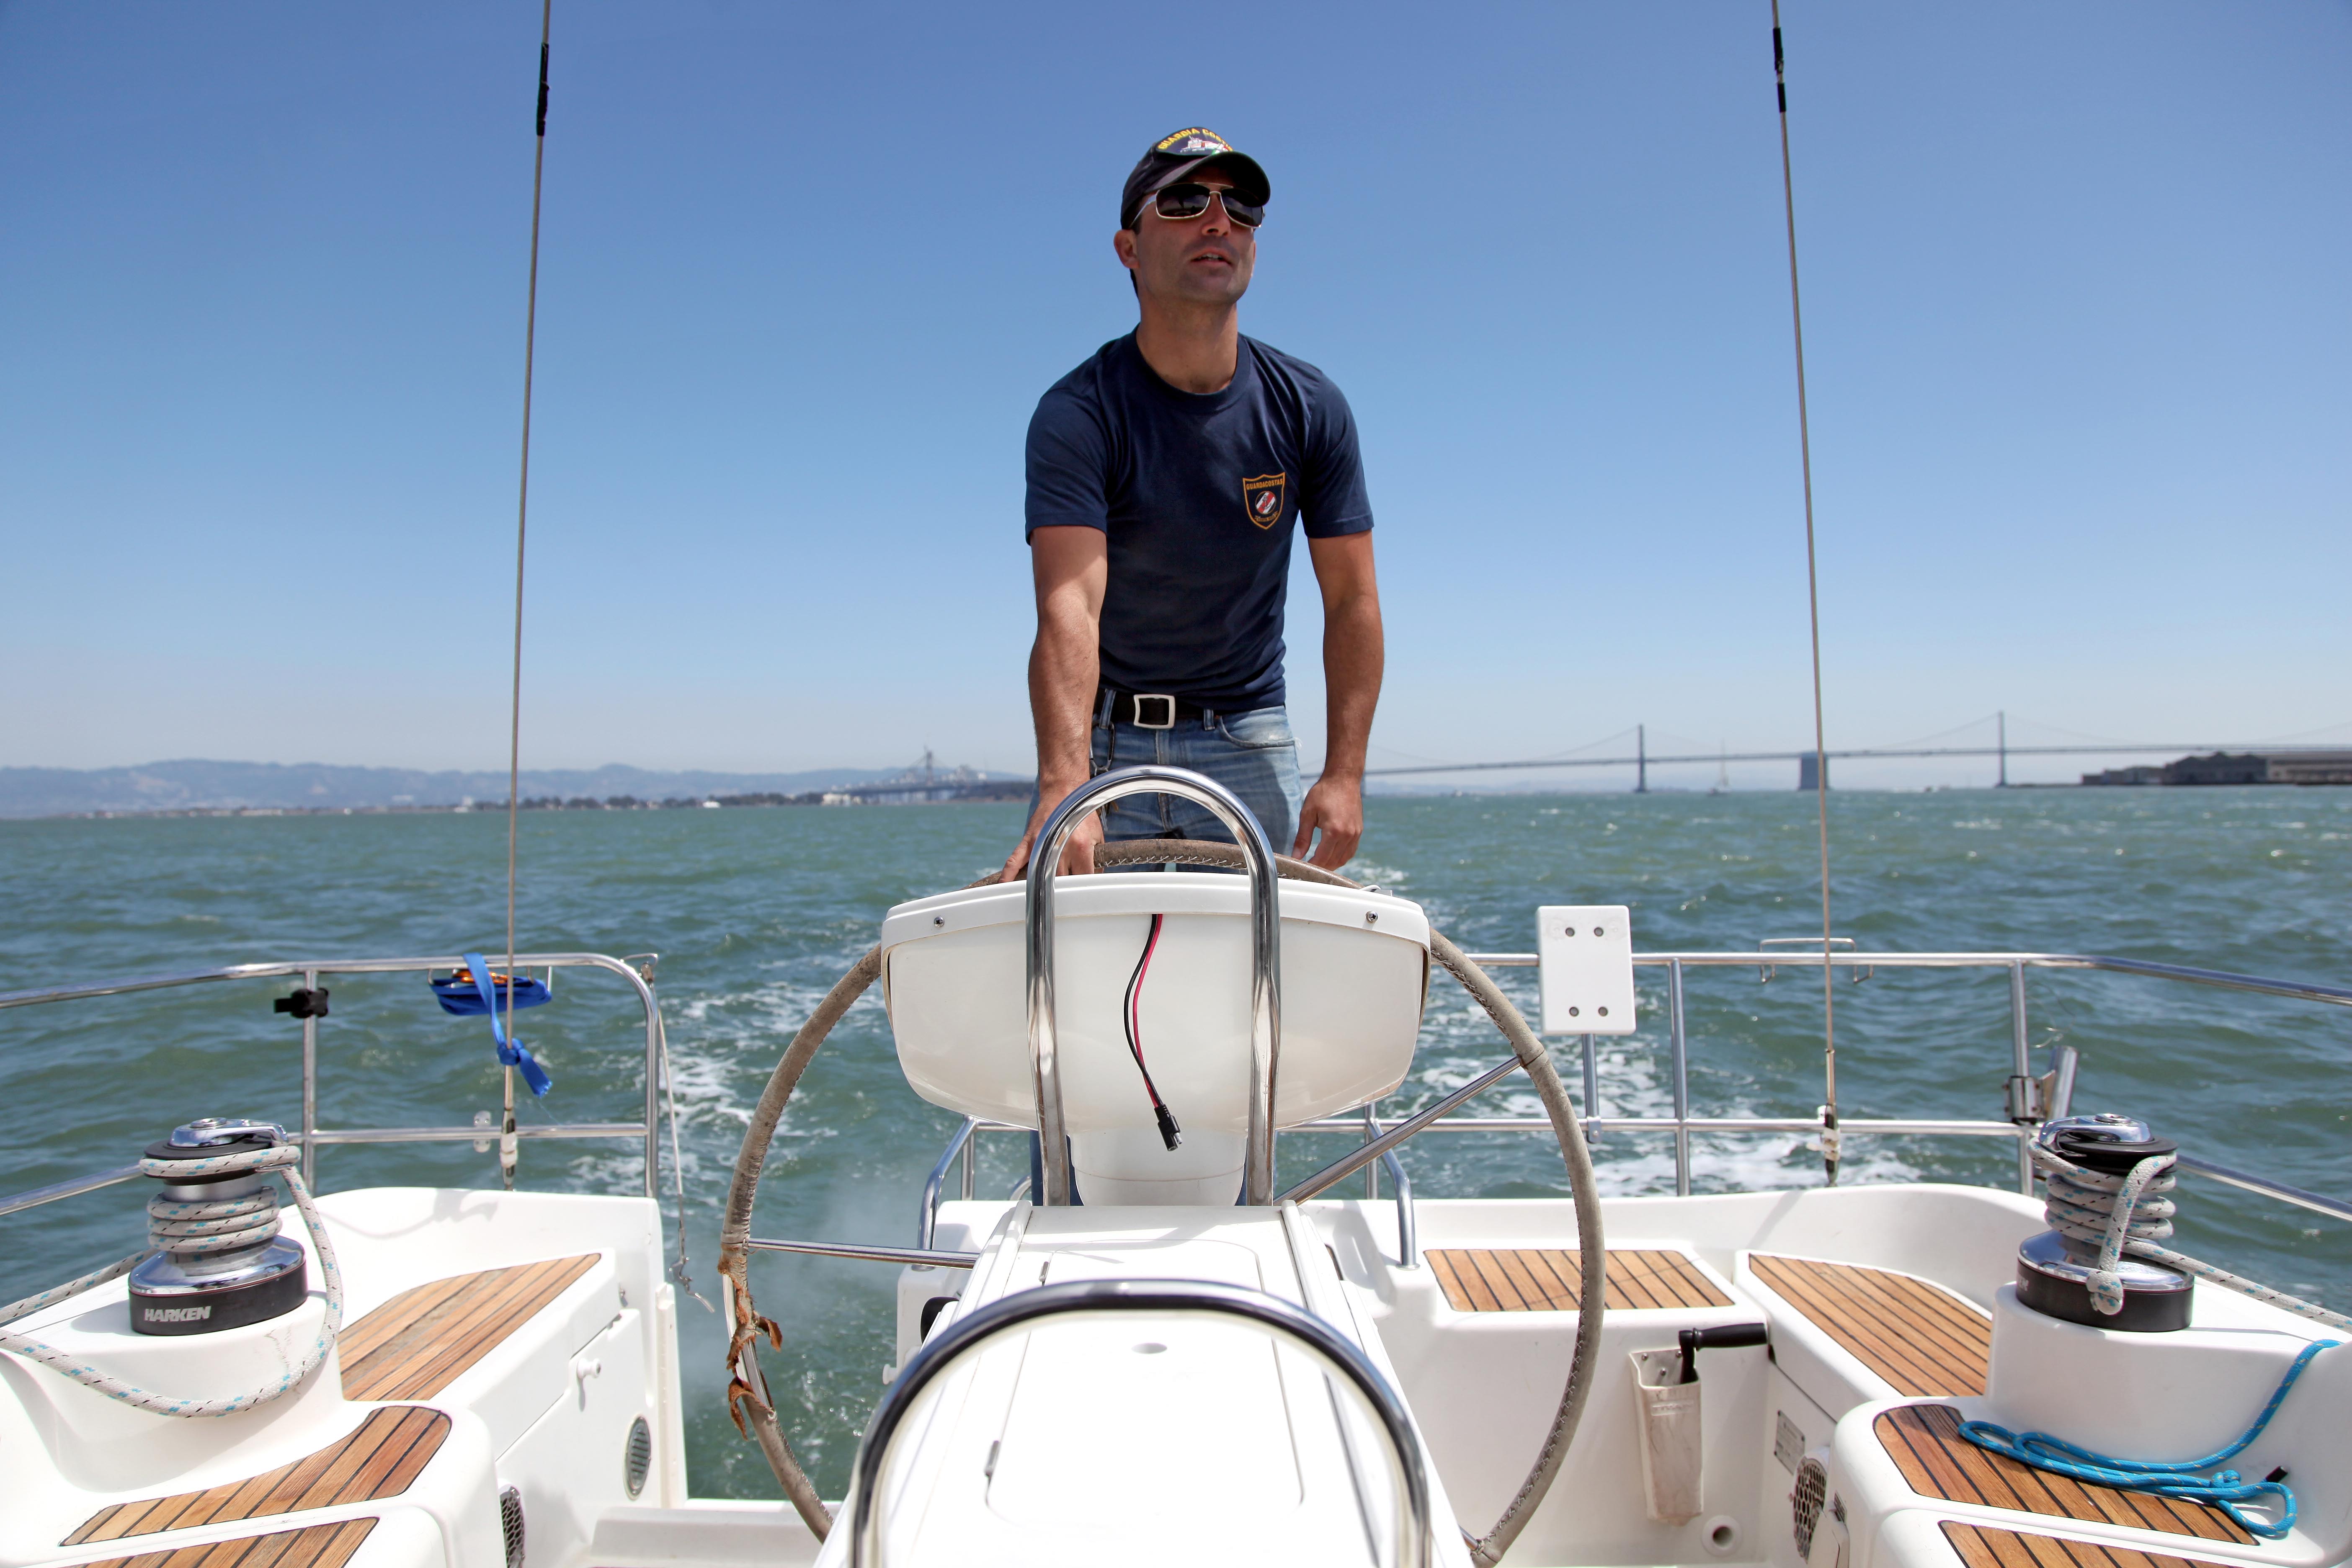 America's Cup and Fleet Week Private Sailing Charter with Captain San Francisco!